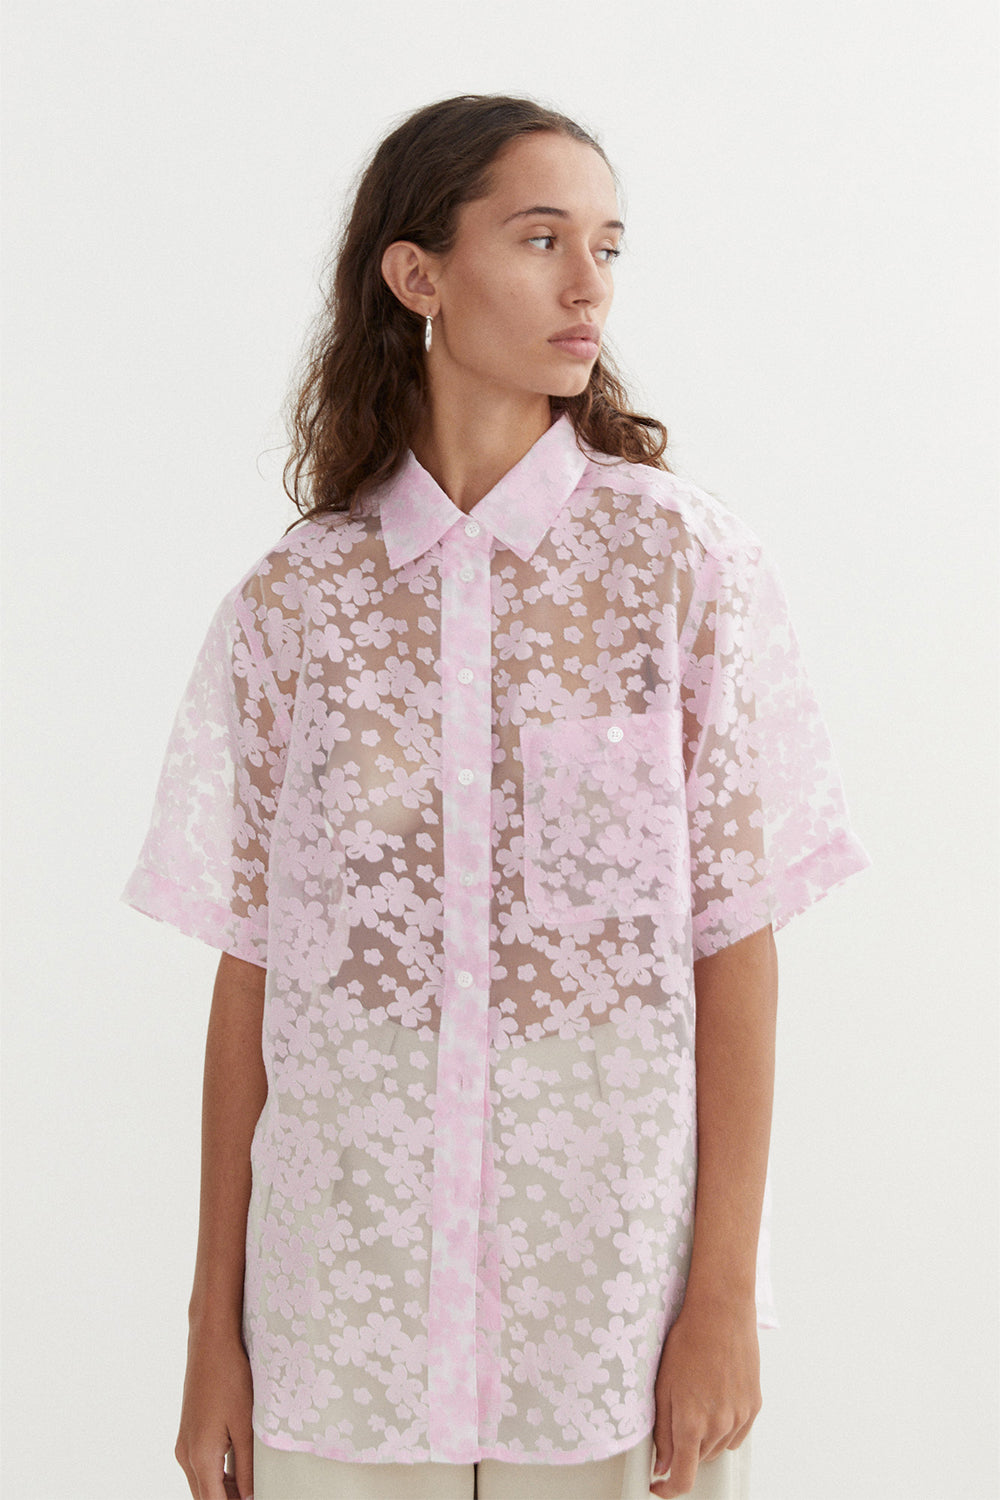 Astra Shirt in Pink by BLANCA